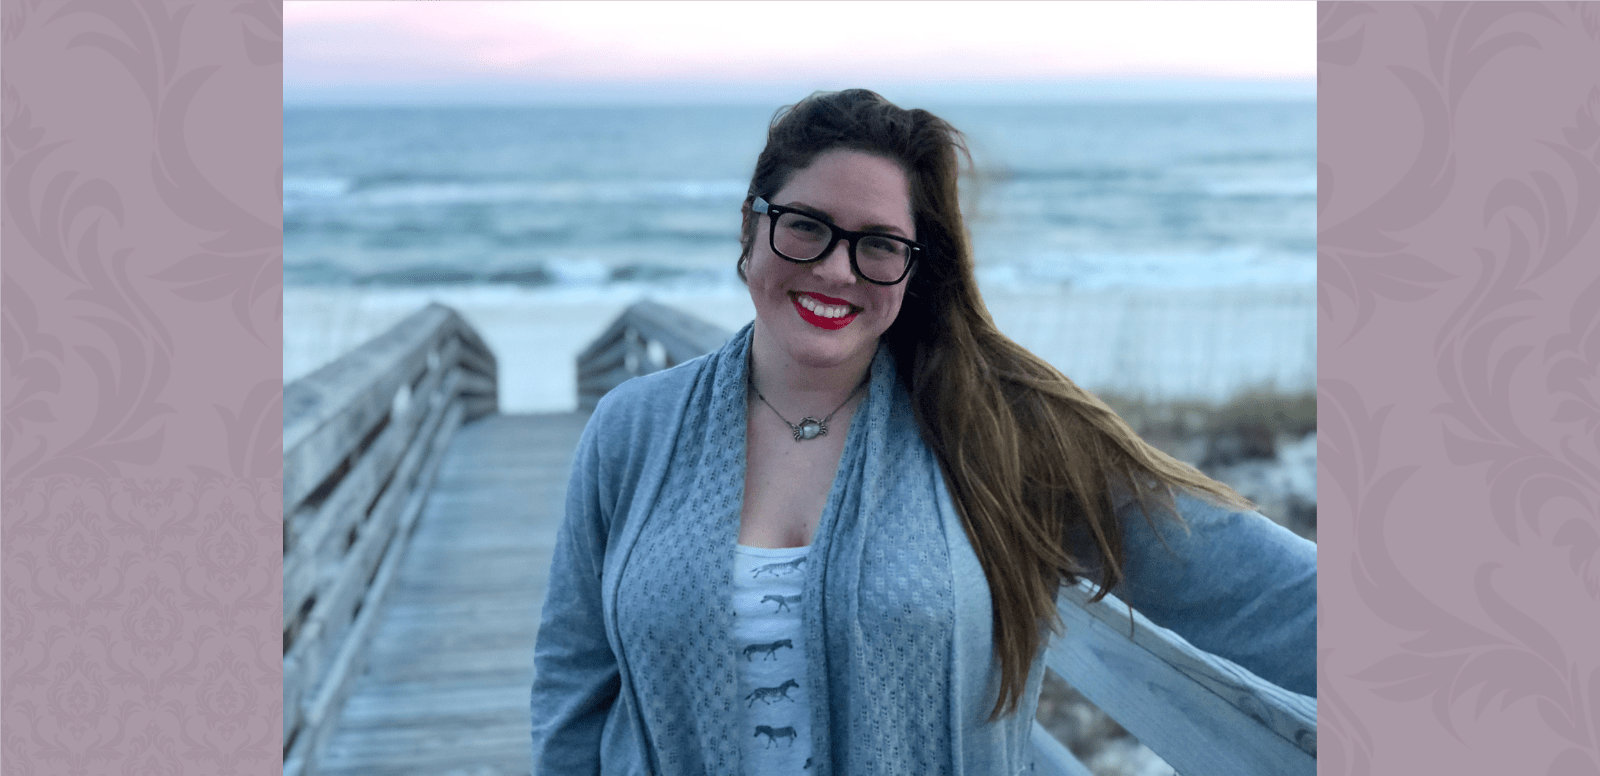 Exclusive Interview: Romance novelist Sierra Simone on writing queer and polyamorous romance